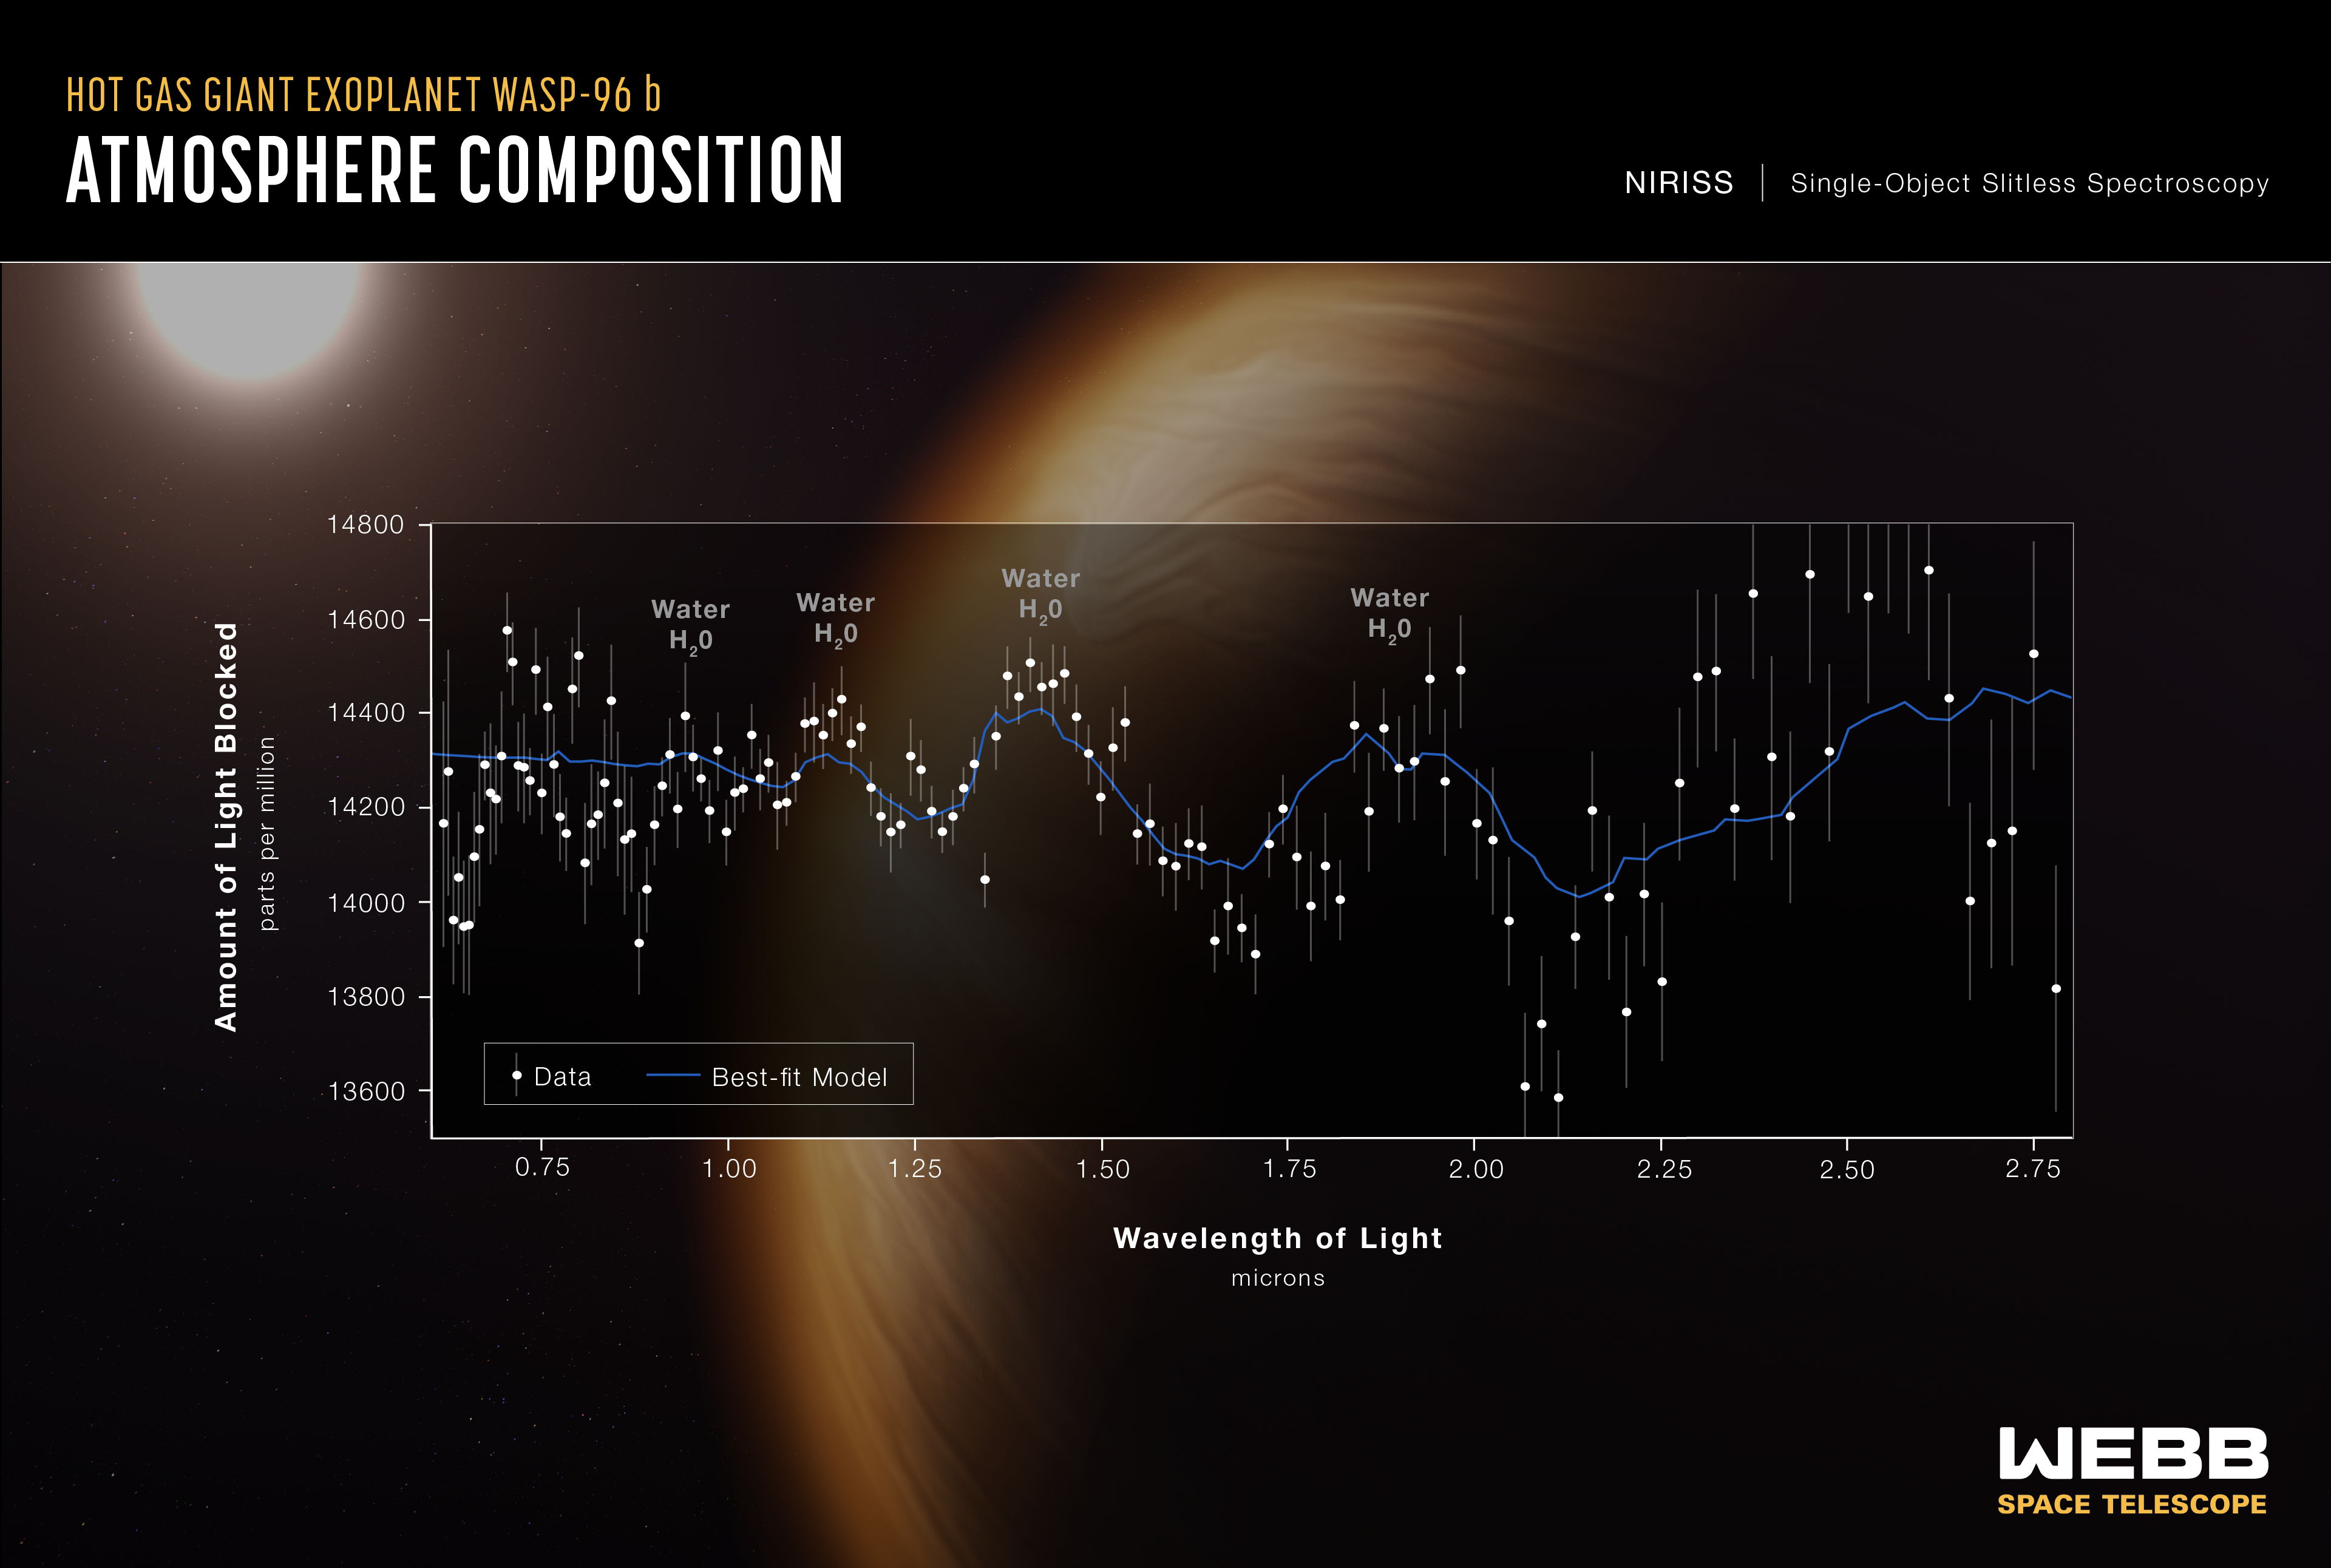 Graphic titled “Hot Gas Giant Exoplanet WASP-96 b Atmosphere Composition, NIRISS SingleObject Slitless Spectroscopy.” The graphic shows the transmission spectrum of the hot gas giant exoplanet WASP-96 b captured using Webb's NIRISS Single-Object Slitless Spectroscopy with an illustration of the planet and its star in the background. The data points are plotted on a graph of amount of light blocked in parts per million versus wavelength of light in microns. A curvy blue line represents a best-fit model. Four prominent peaks visible in the data and model are labeled “water, H 2 O.”